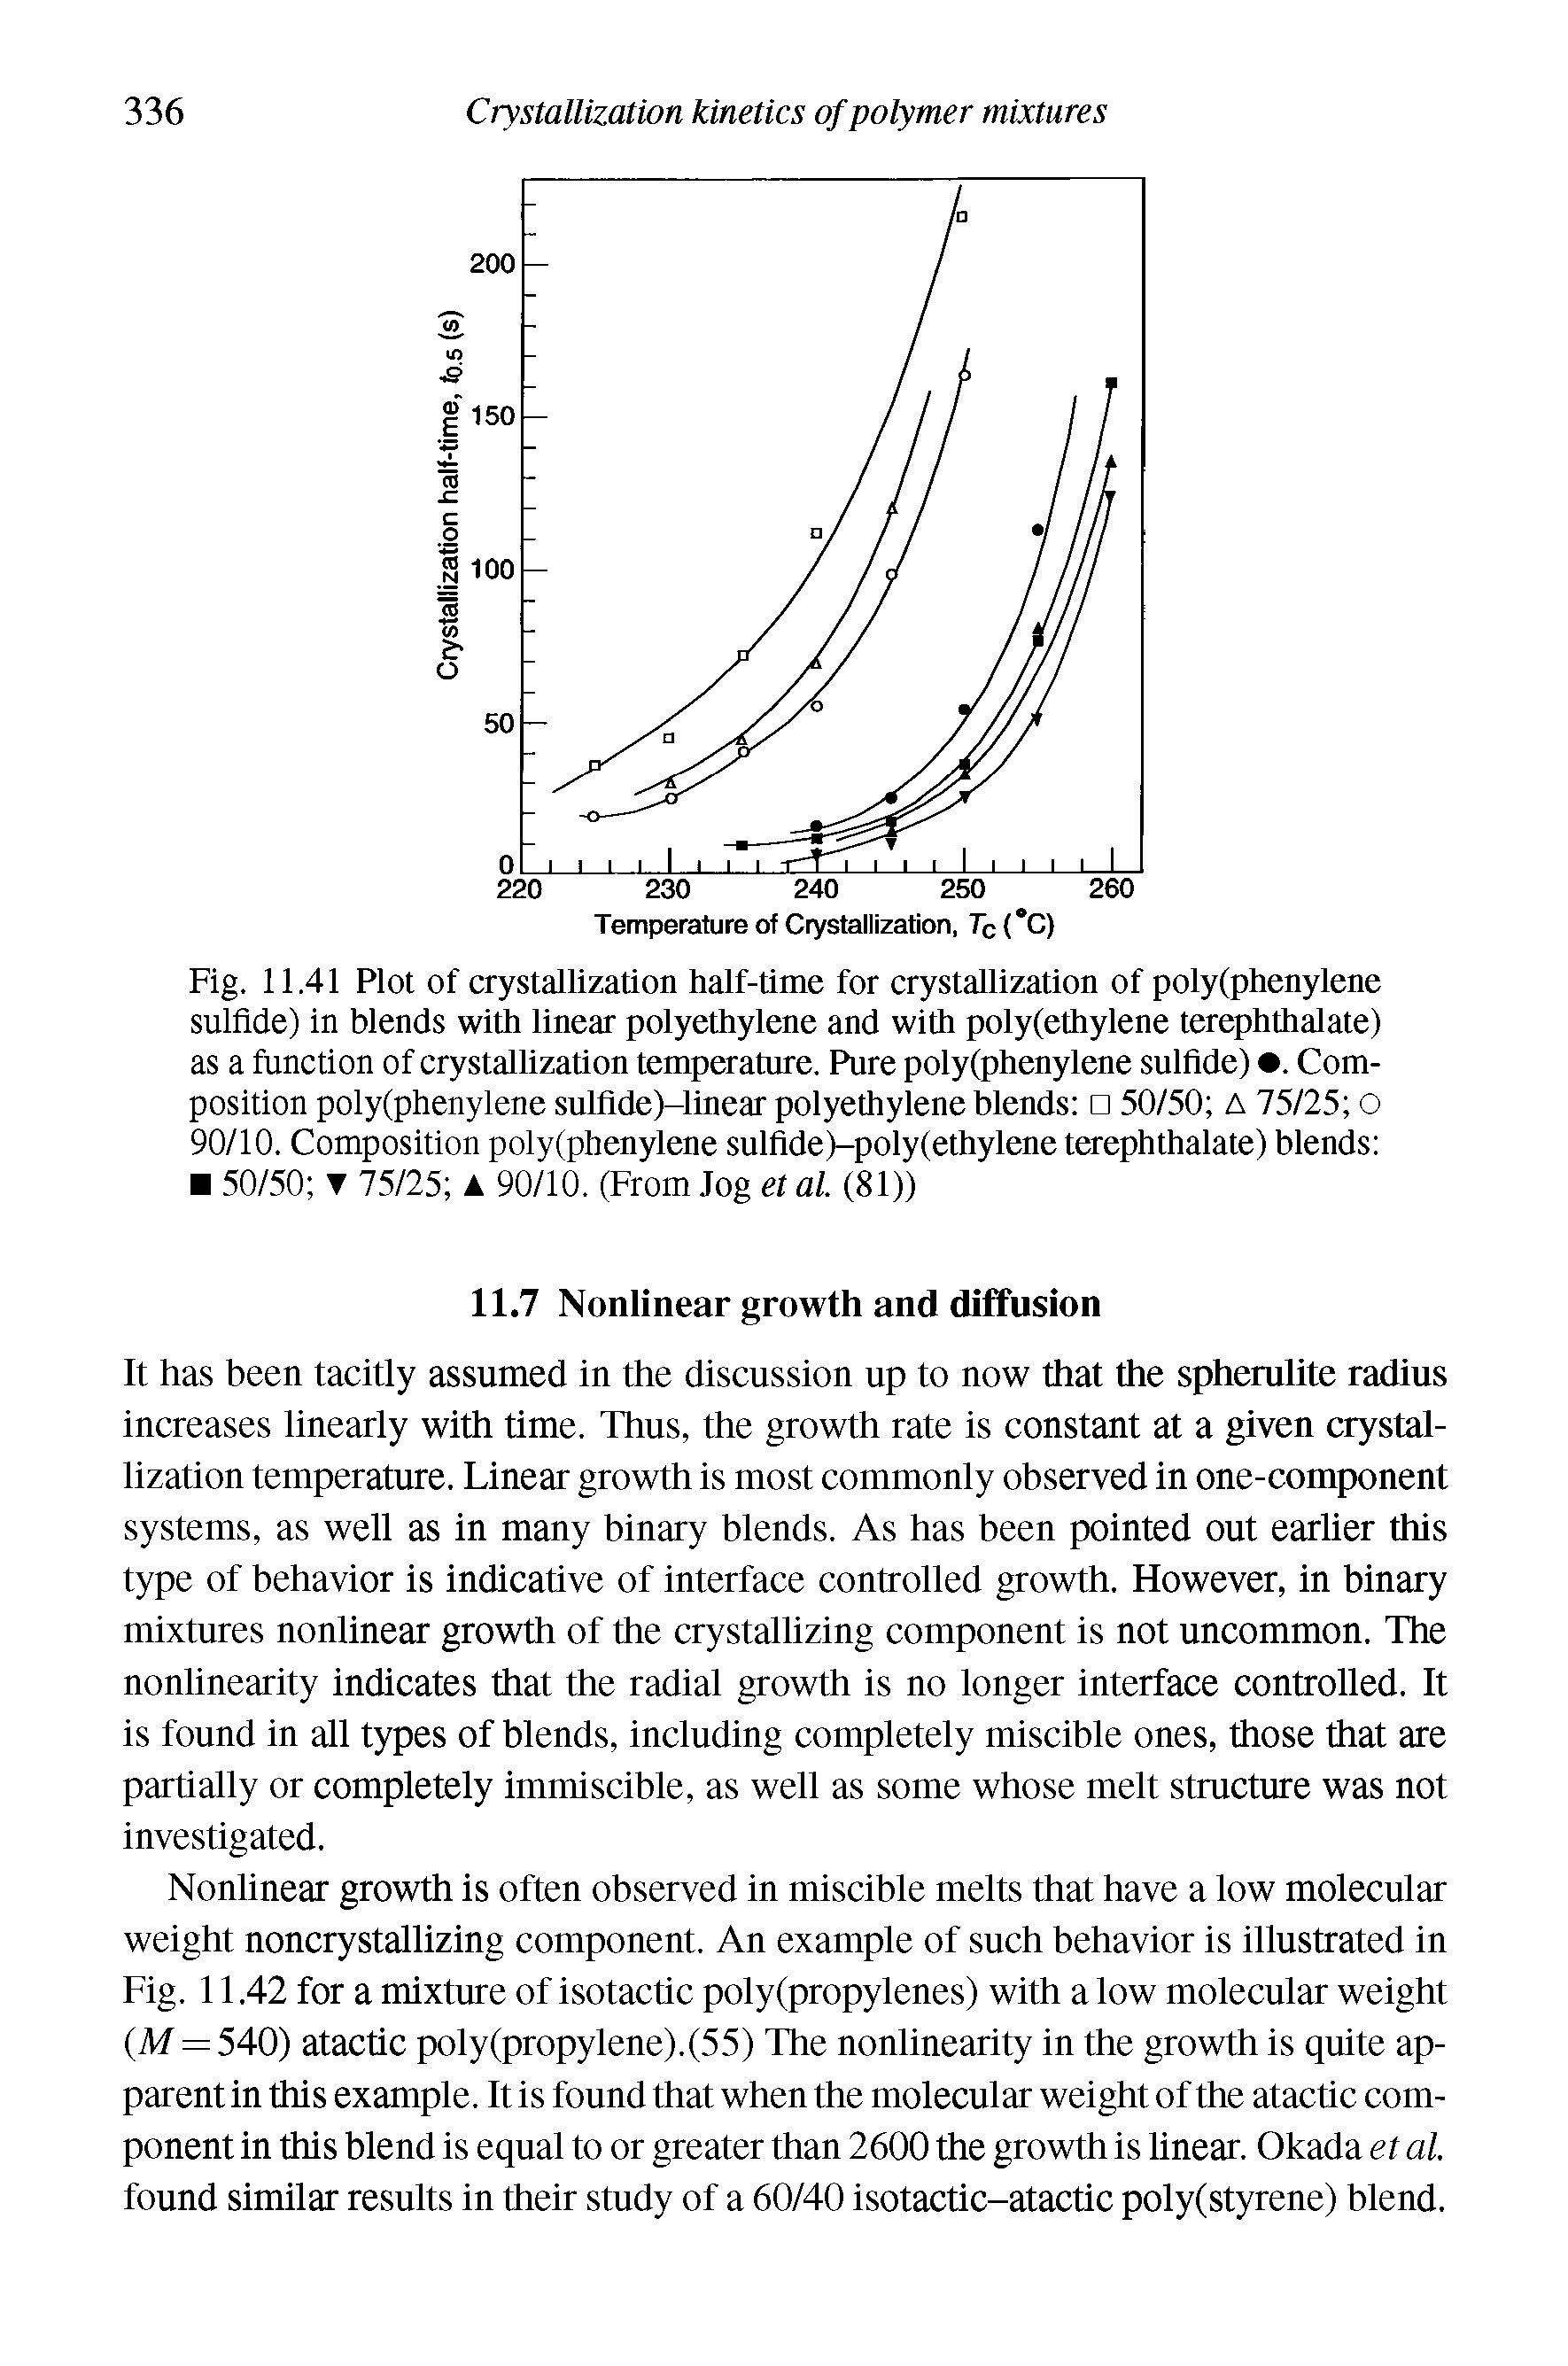 Fig. 11.41 Plot of crystallization half-time for crystallization of poly(phenylene sulfide) in blends with linear polyethylene and with poly(ethylene terephthalate) as a function of crystallization temperature. Pure poly(phenylene sulfide) . Composition poly(phenylene sulflde)-linear polyethylene blends 50/50 A 75/25 o 90/10. Composition poly(phenylene sulfide)-poly(ethylene terephthalate) blends 50/50 T 75/25 A 90/10. (From Jog et al. (81))...